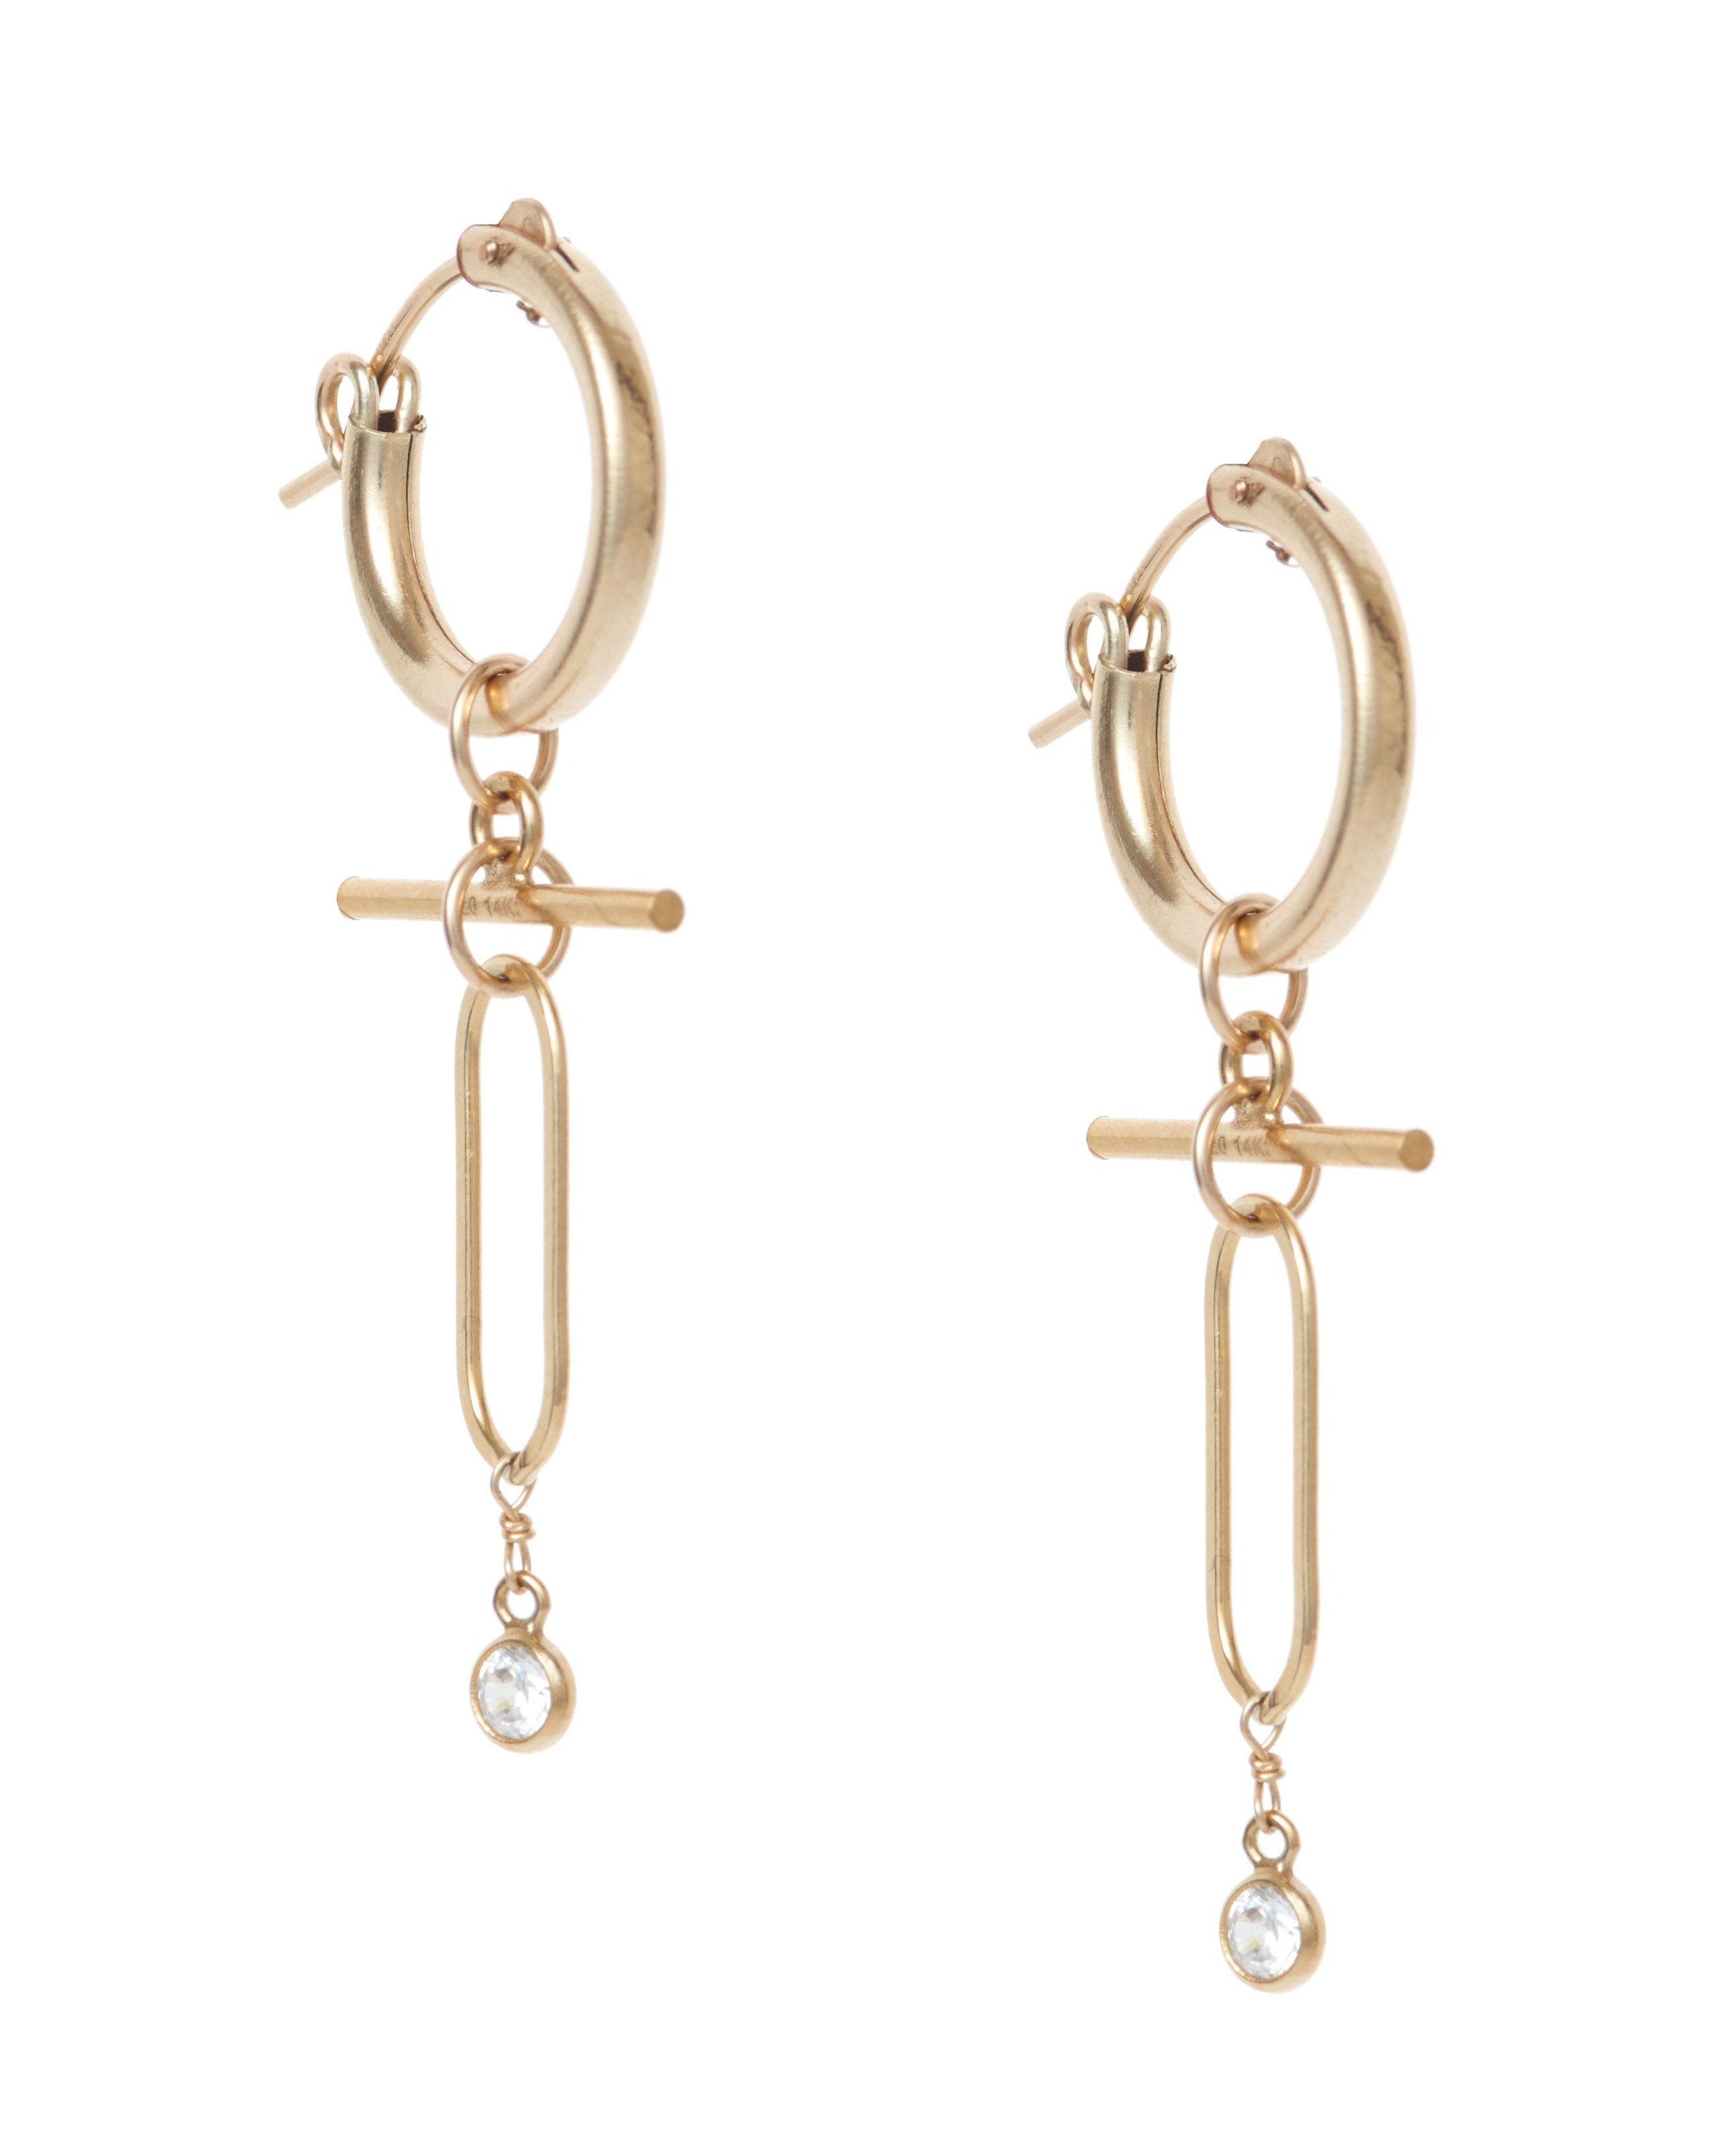 Tabetha Hoops Earrings by KOZAKH. 15mm snap closure hoop earrings, with 1 inch drop length, crafted in 14K Gold Filled, featuring a dangling horizontal bar and a 3mm Cubic Zirconia Bezel.